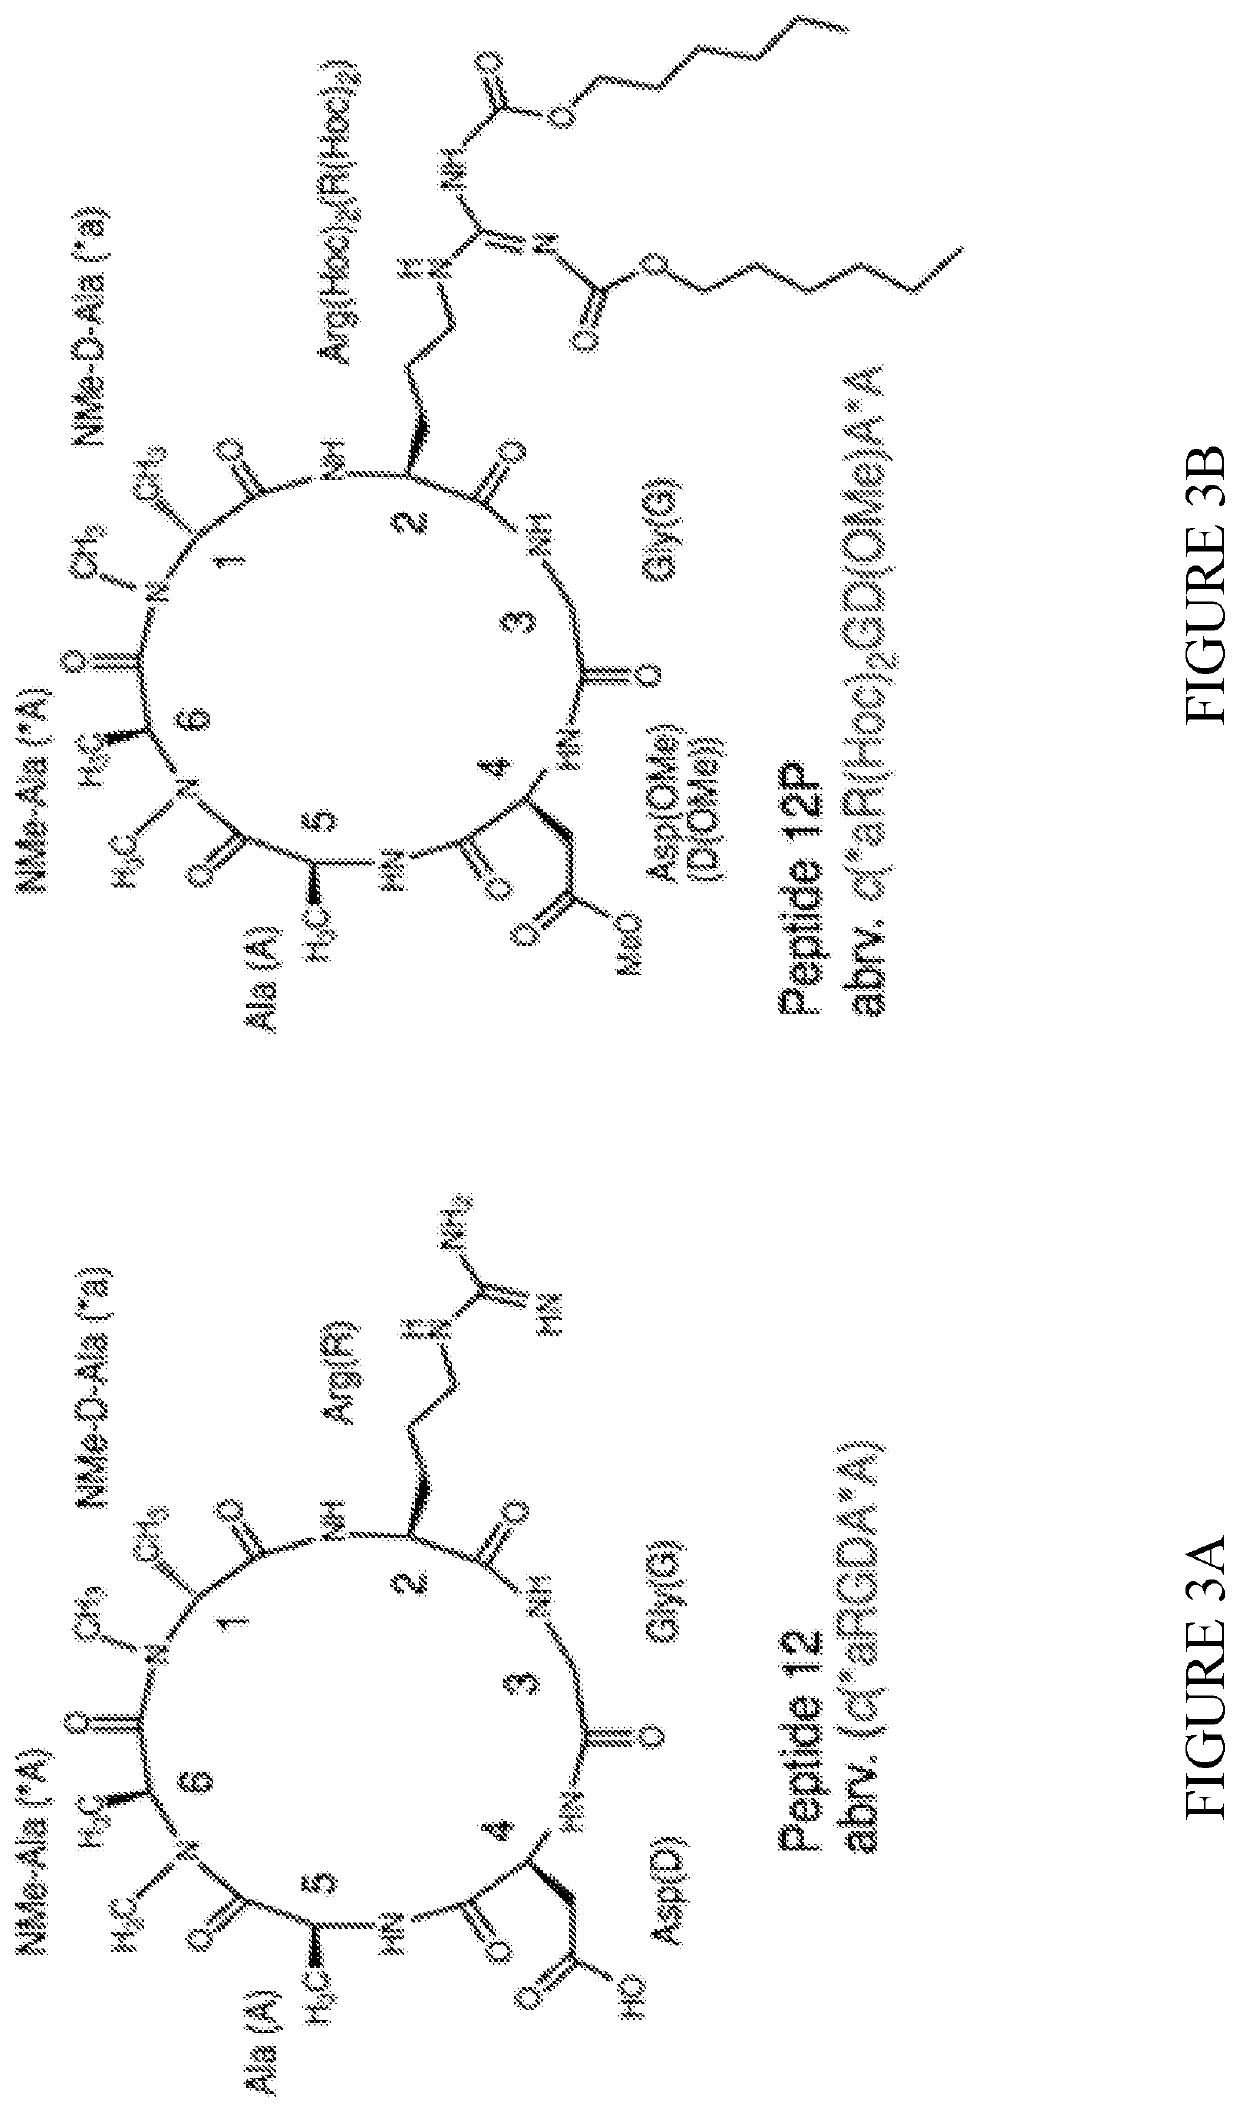 N-methylated cyclic peptides and their prodrugs